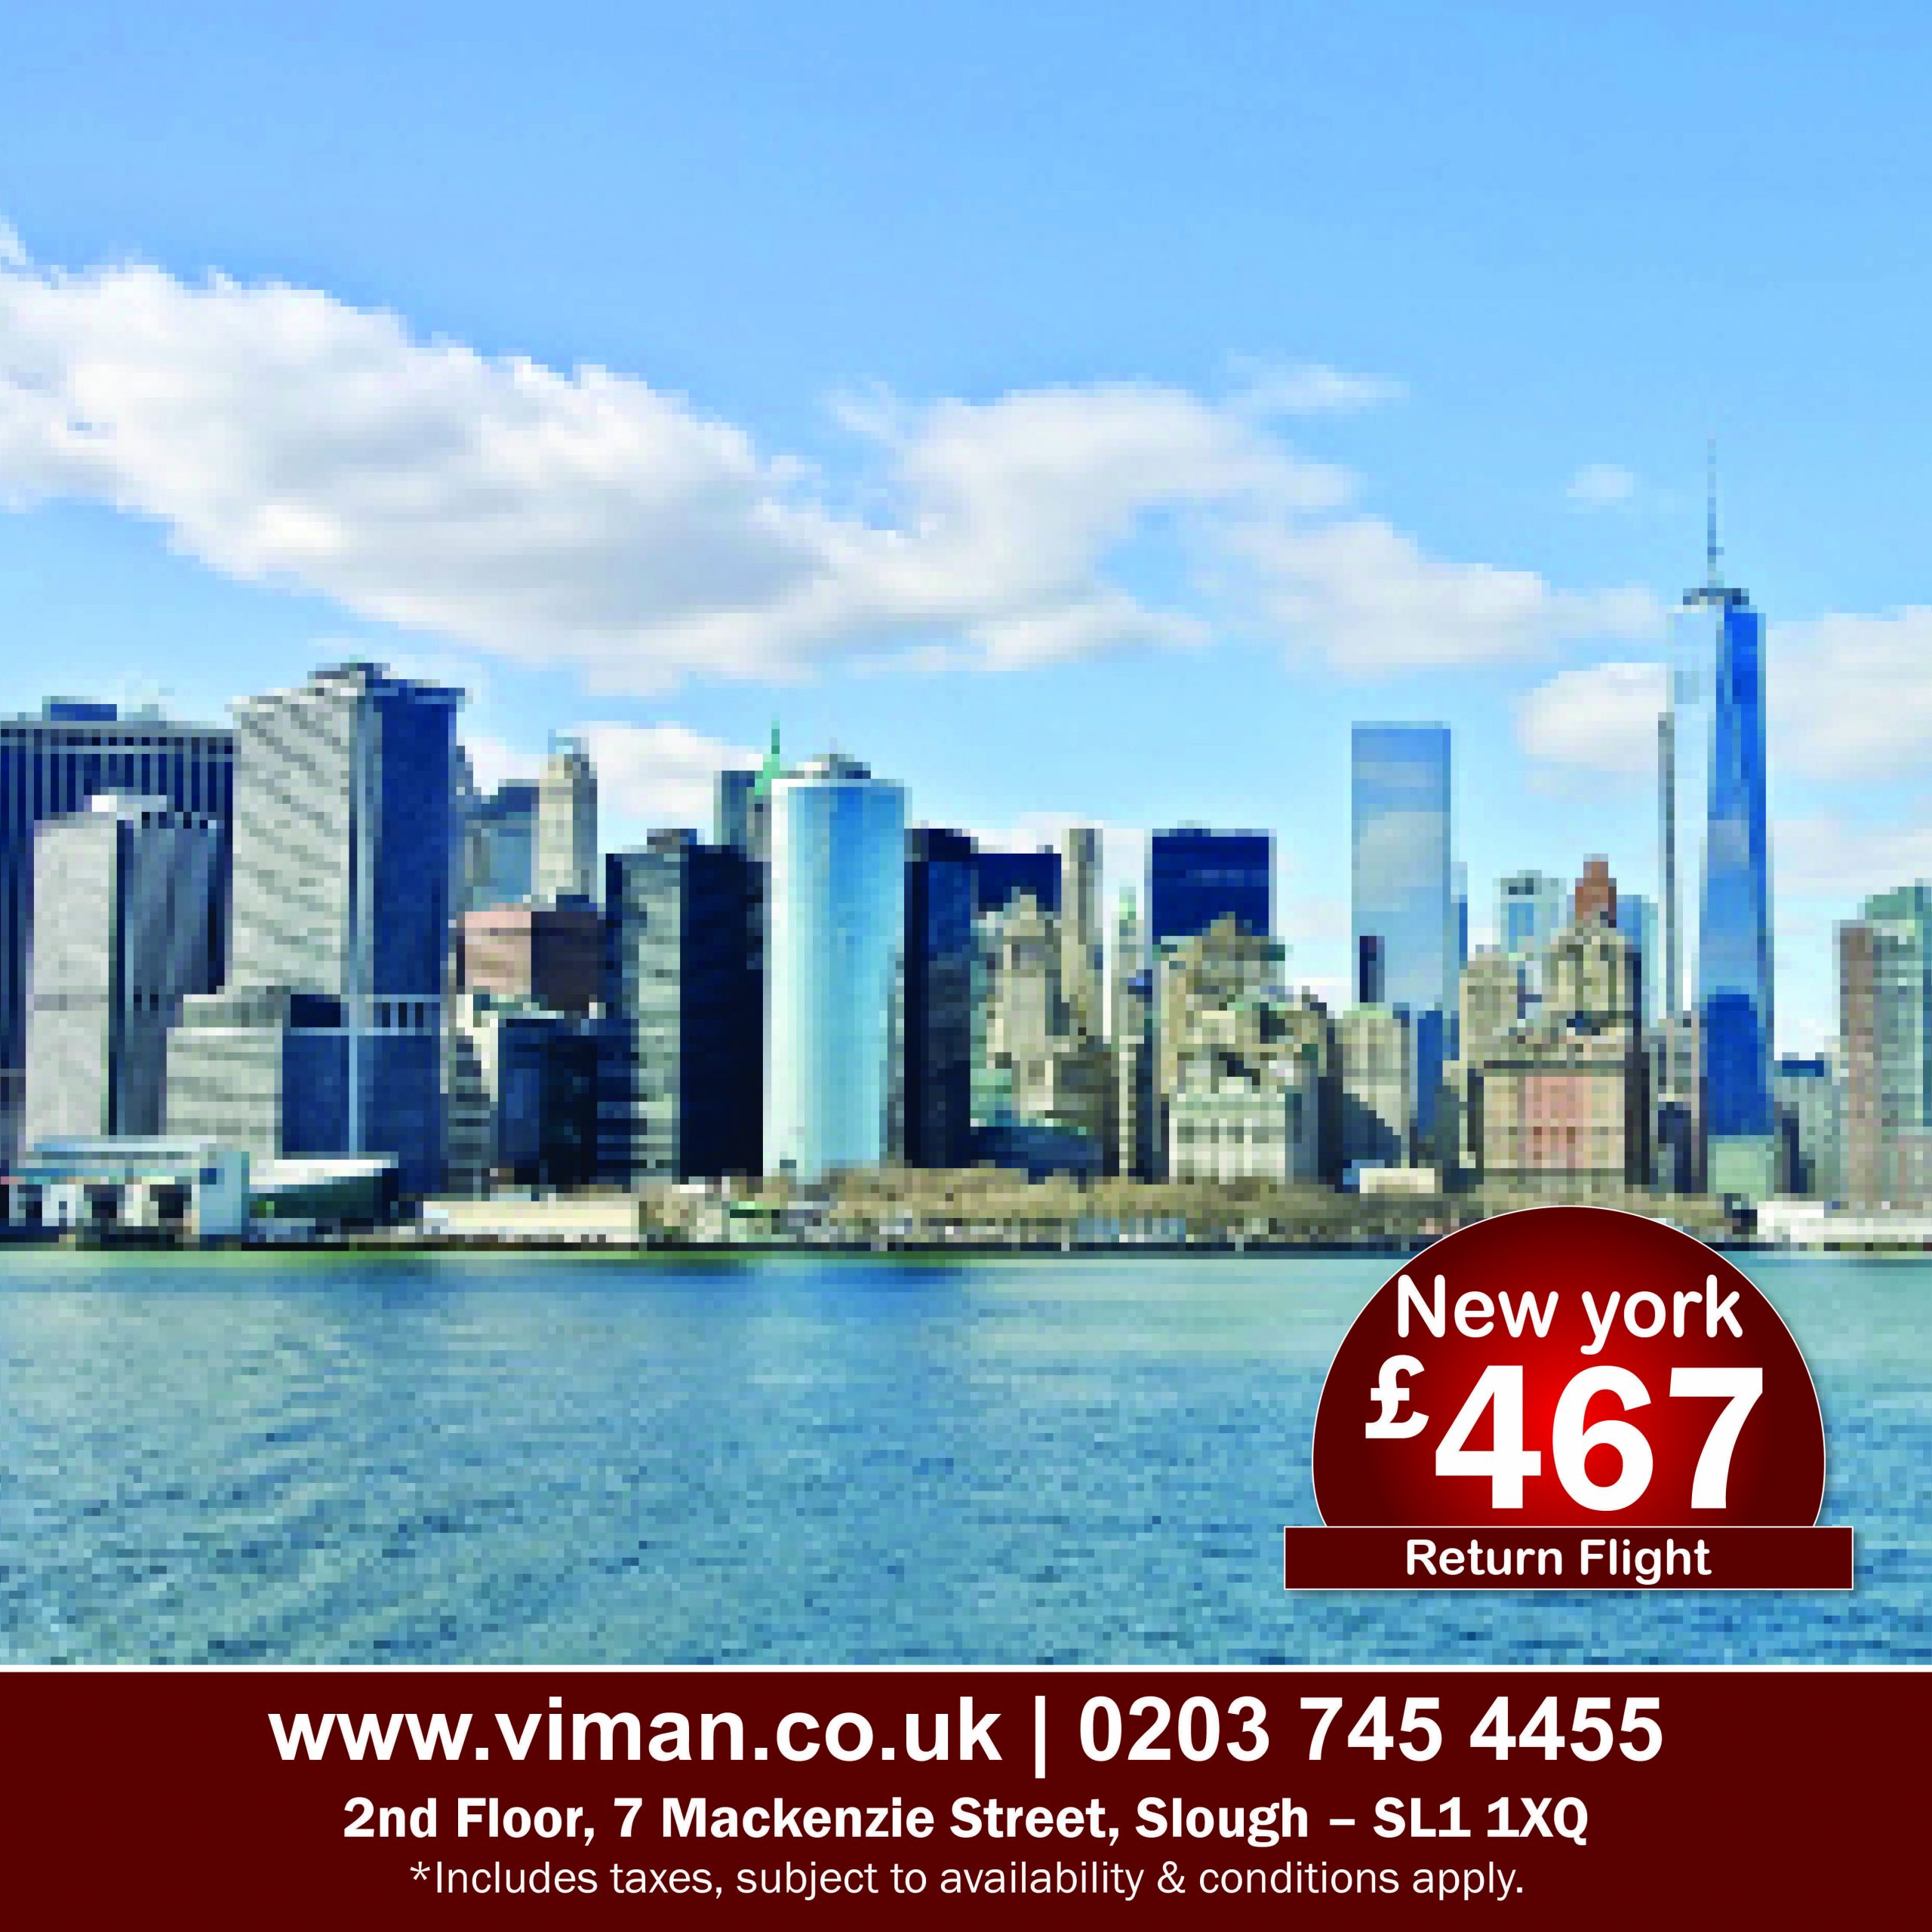 Find cheap flights to New York from London with www.viman ...